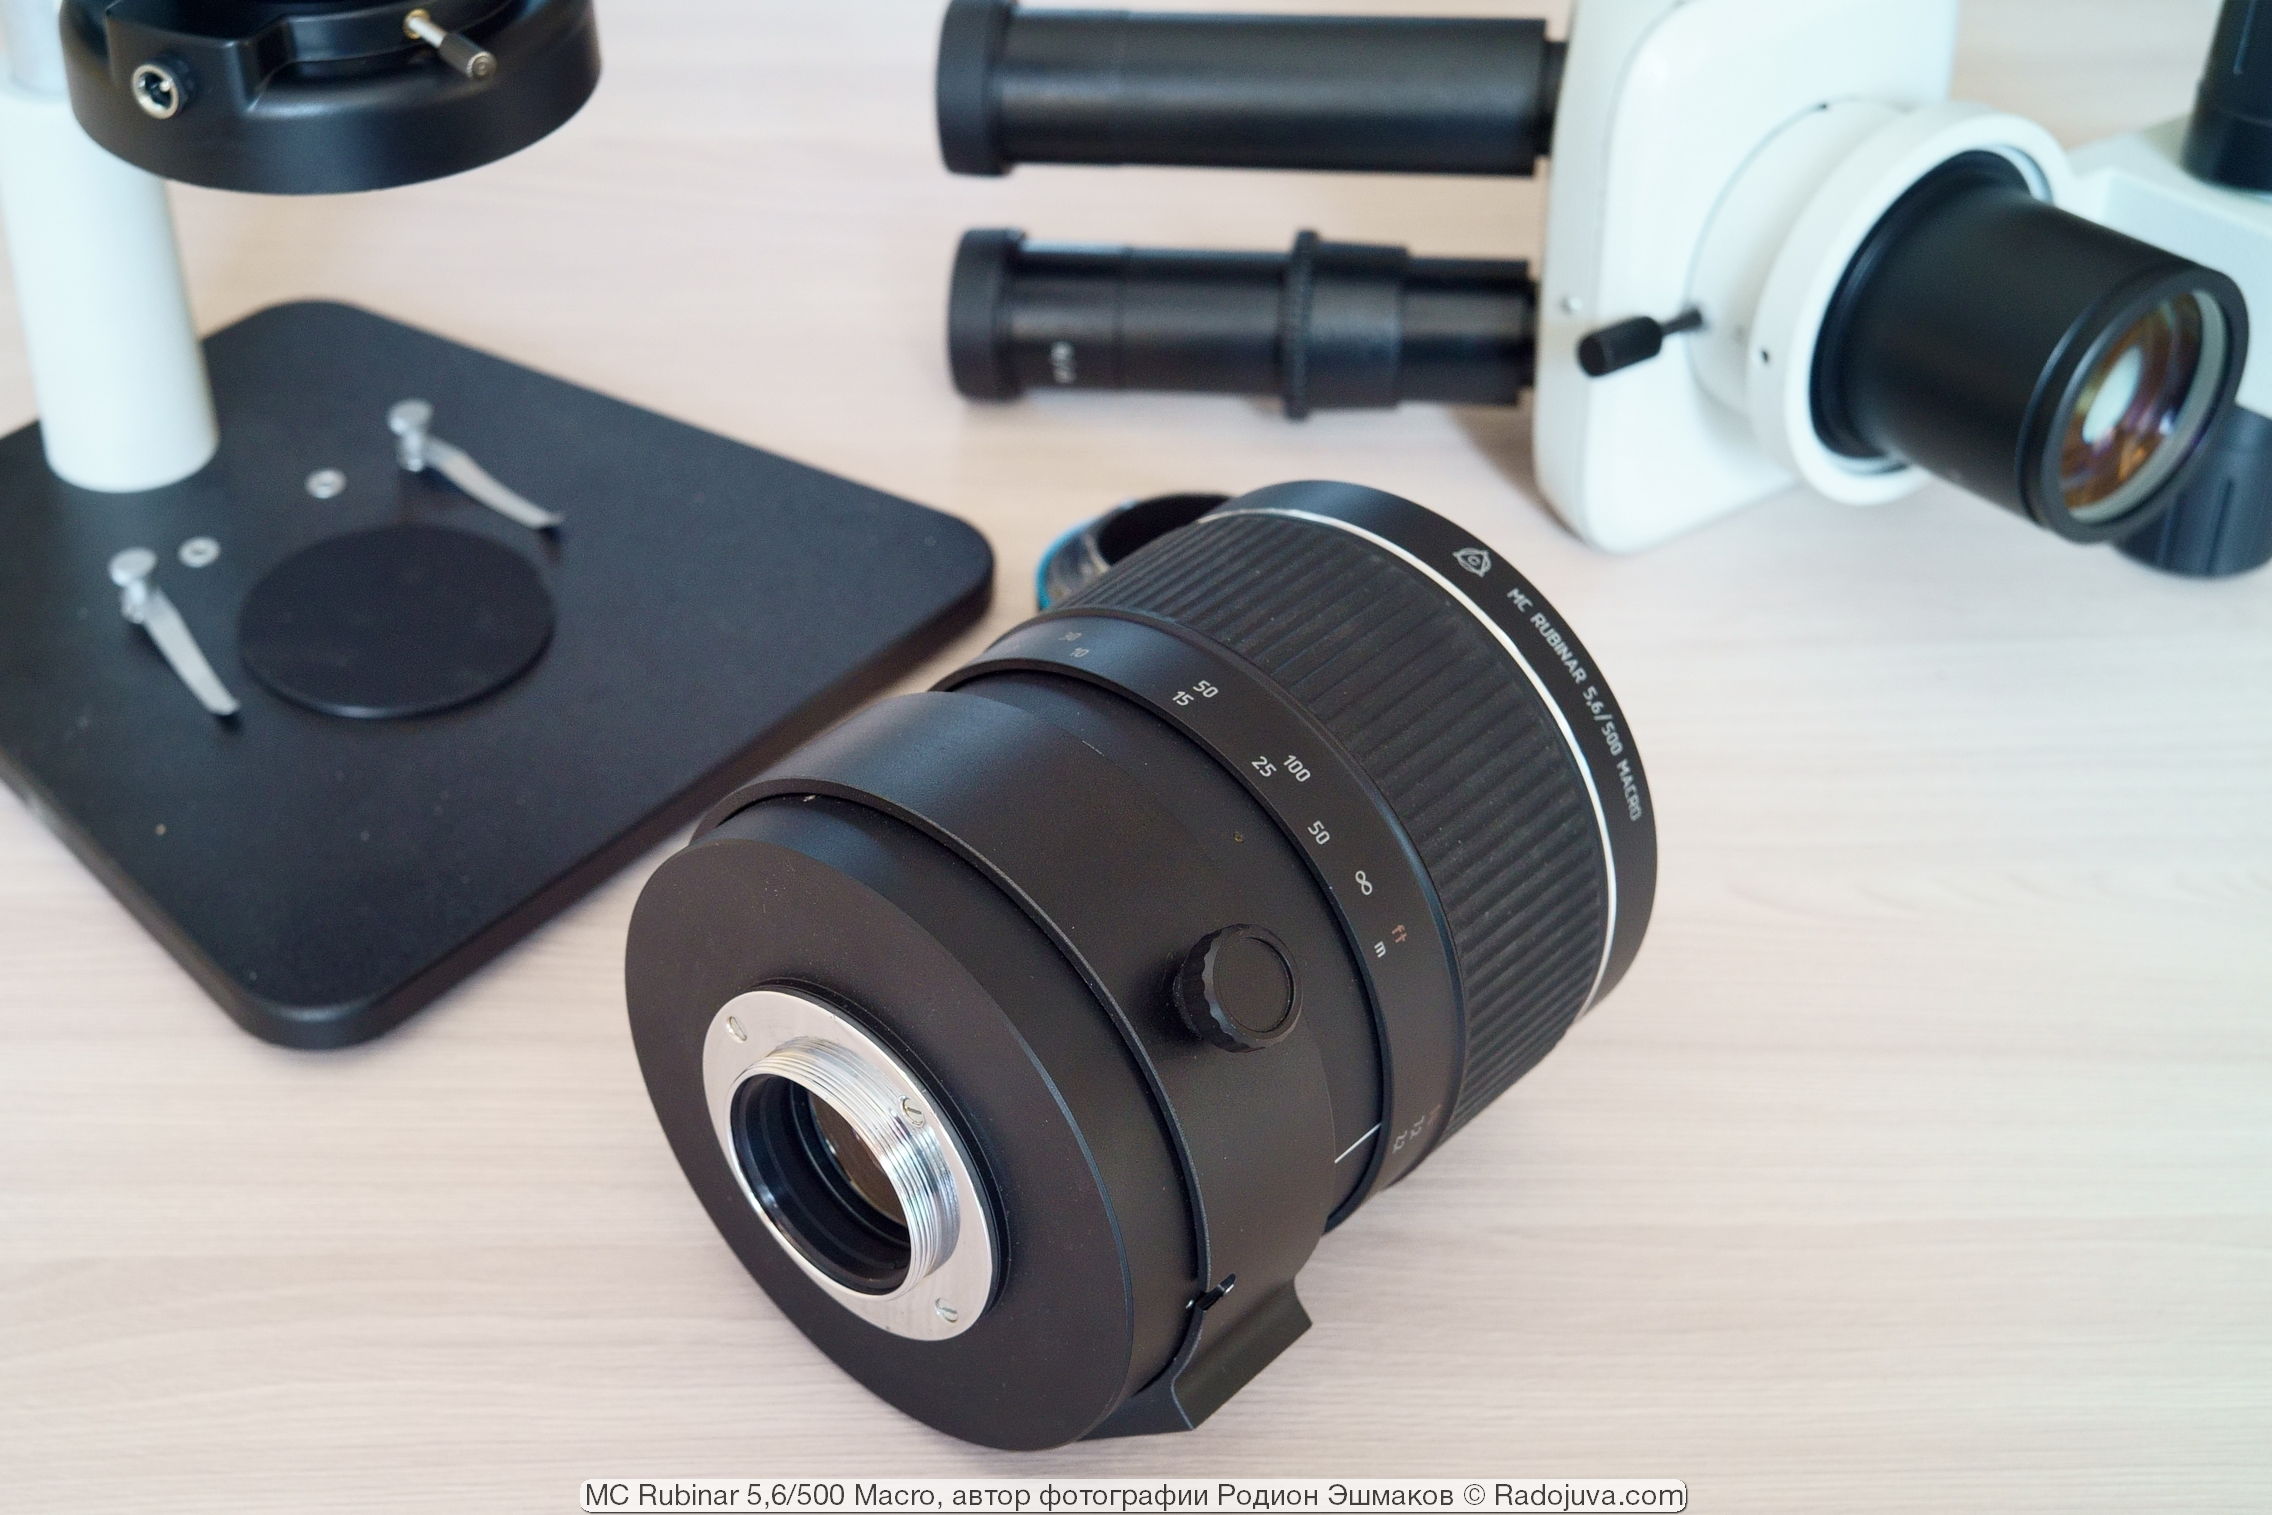 The M42 mount is universal, but SLR cameras with a flash beak are geometrically incompatible with this lens.